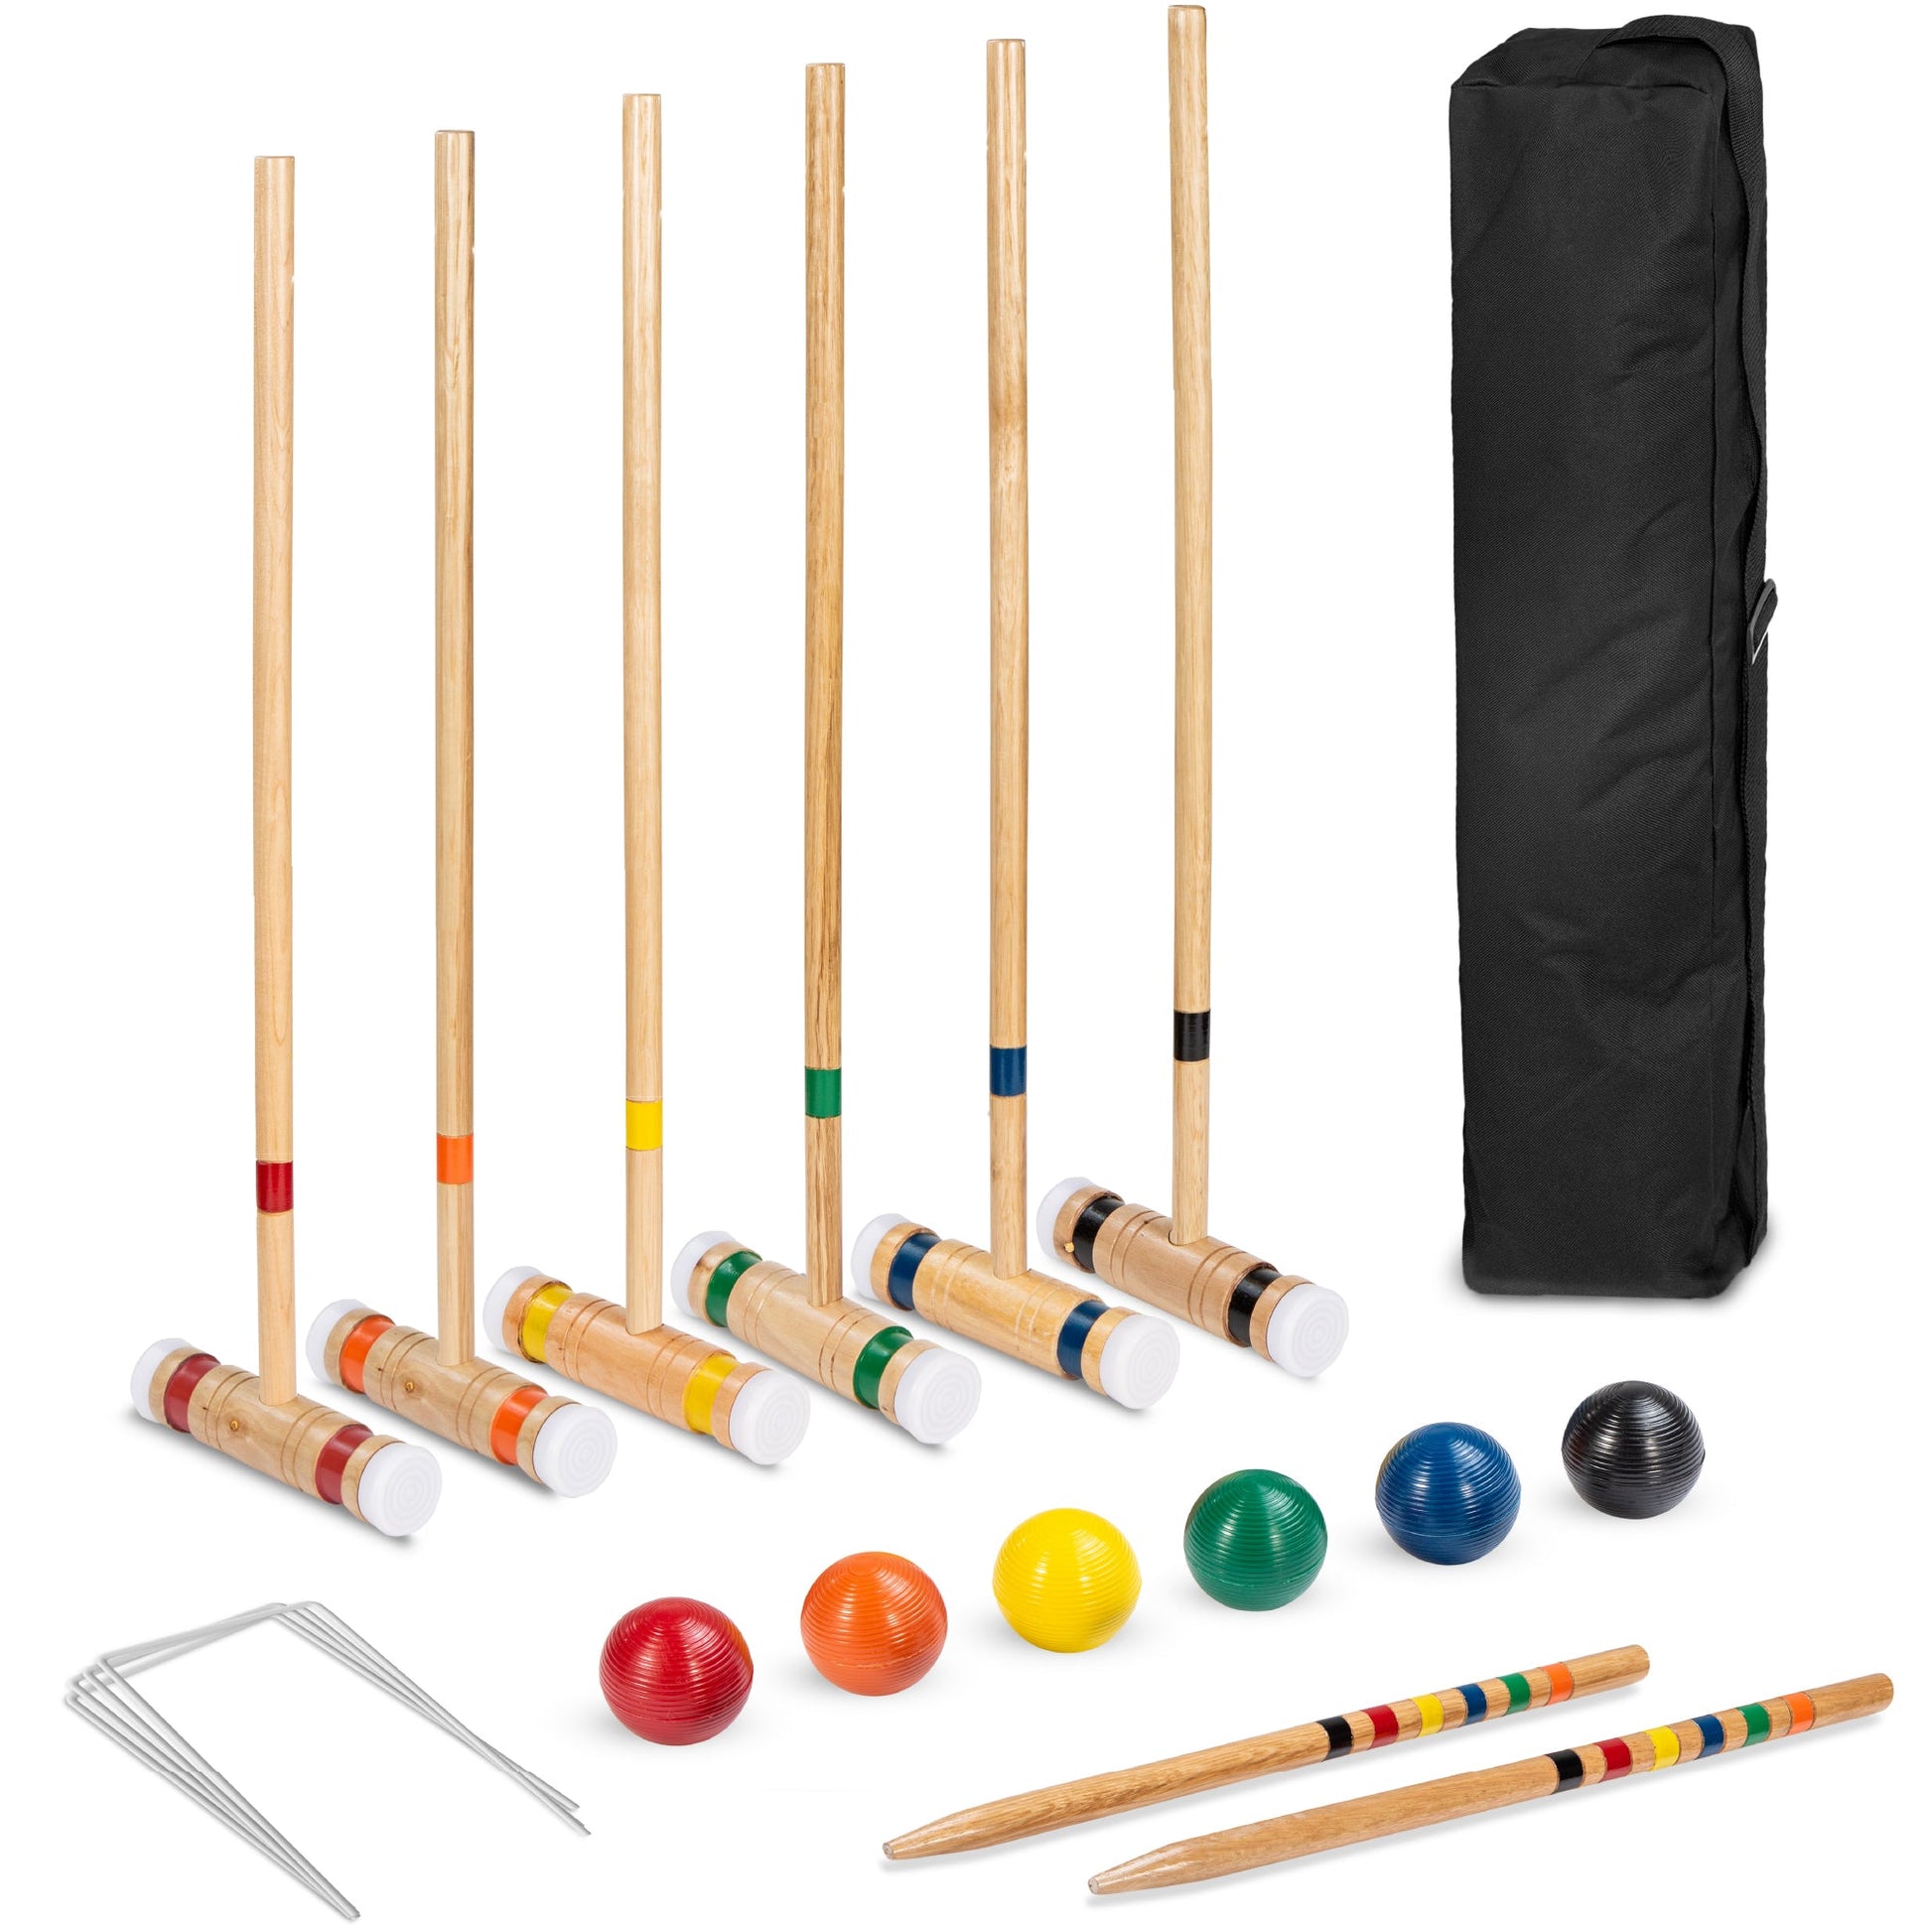 6-Player Wood Croquet Set w/ 6 Mallets, 6 Balls, Wickets, Stakes, Bag - 32in